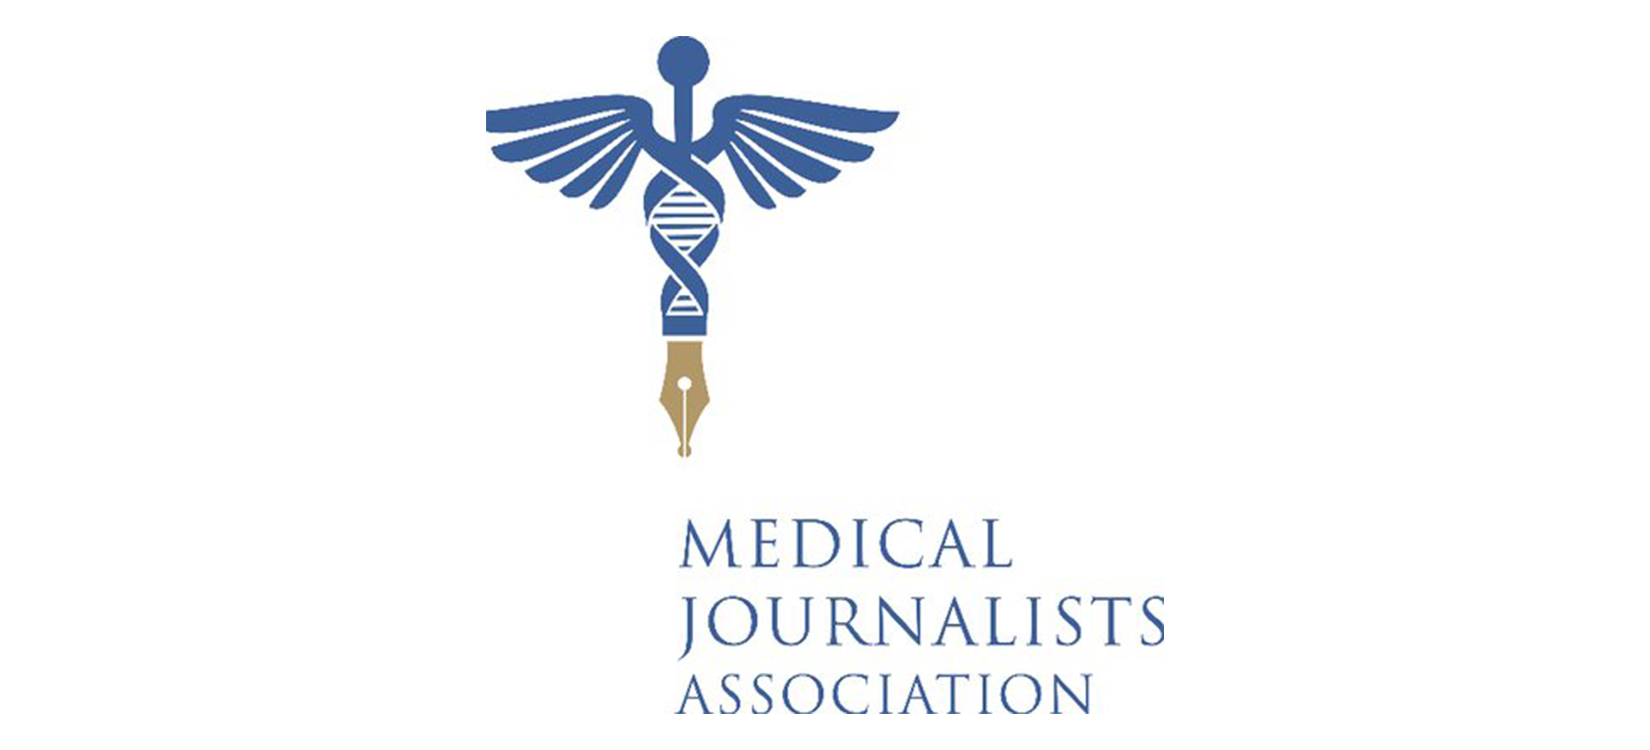 Two nominations at the Medical Journalism Awards